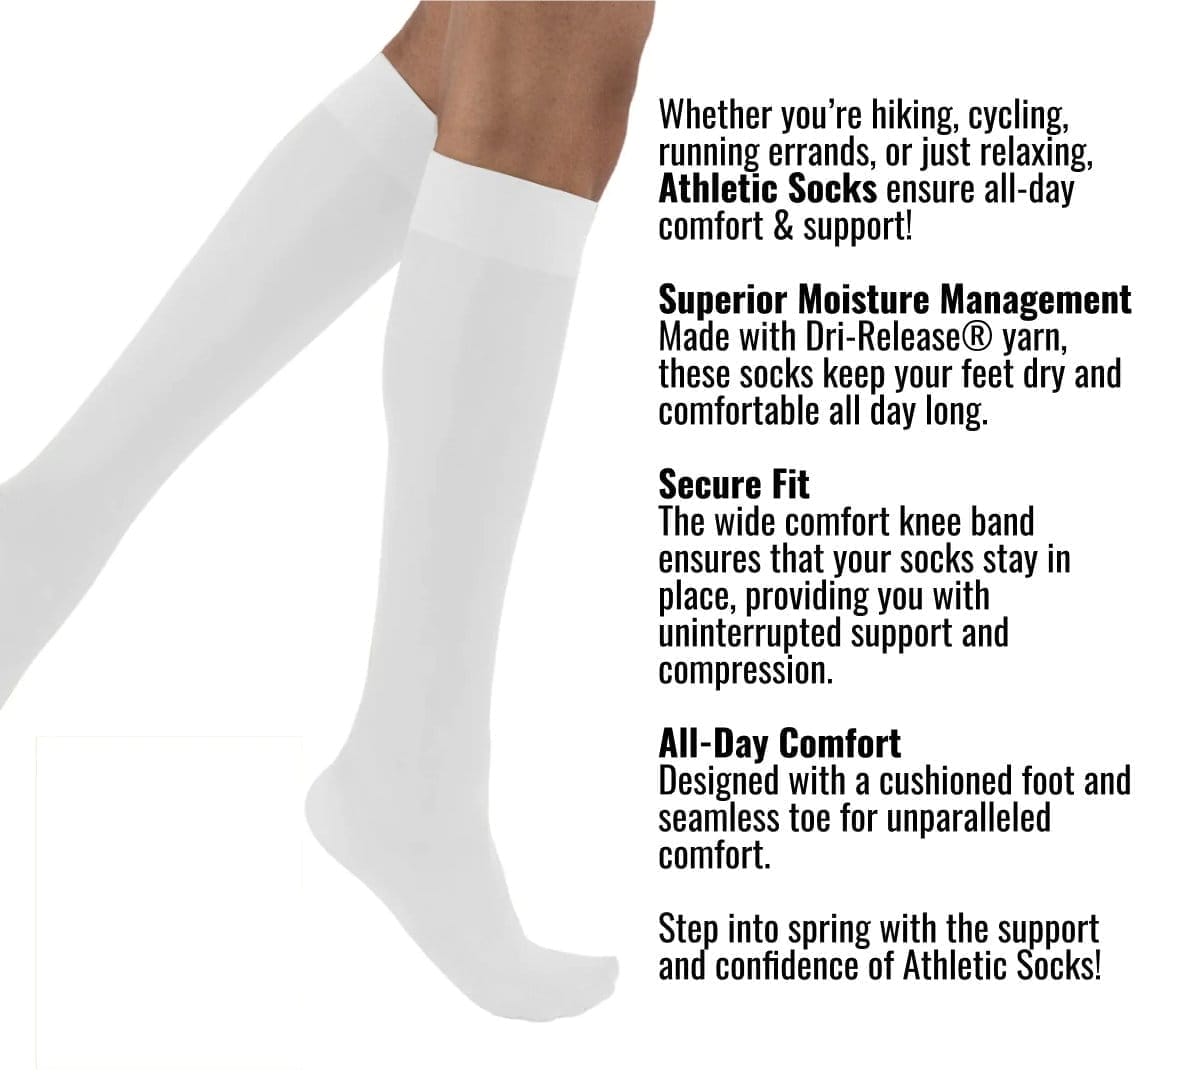 Whether you’re hiking, cycling, running errands, or just relaxing, Athletic Socks ensure all-day comfort & support! Superior Moisture Management Made with Dri-Release® yarn, these socks keep your feet dry and comfortable all day long. Secure Fit The wide comfort knee band ensures that your socks stay in place, providing you with uninterrupted support and compression. All-Day Comfort Designed with a cushioned foot and seamless toe for unparalleled comfort. Step into spring with the support and confidence of Athletic Socks!